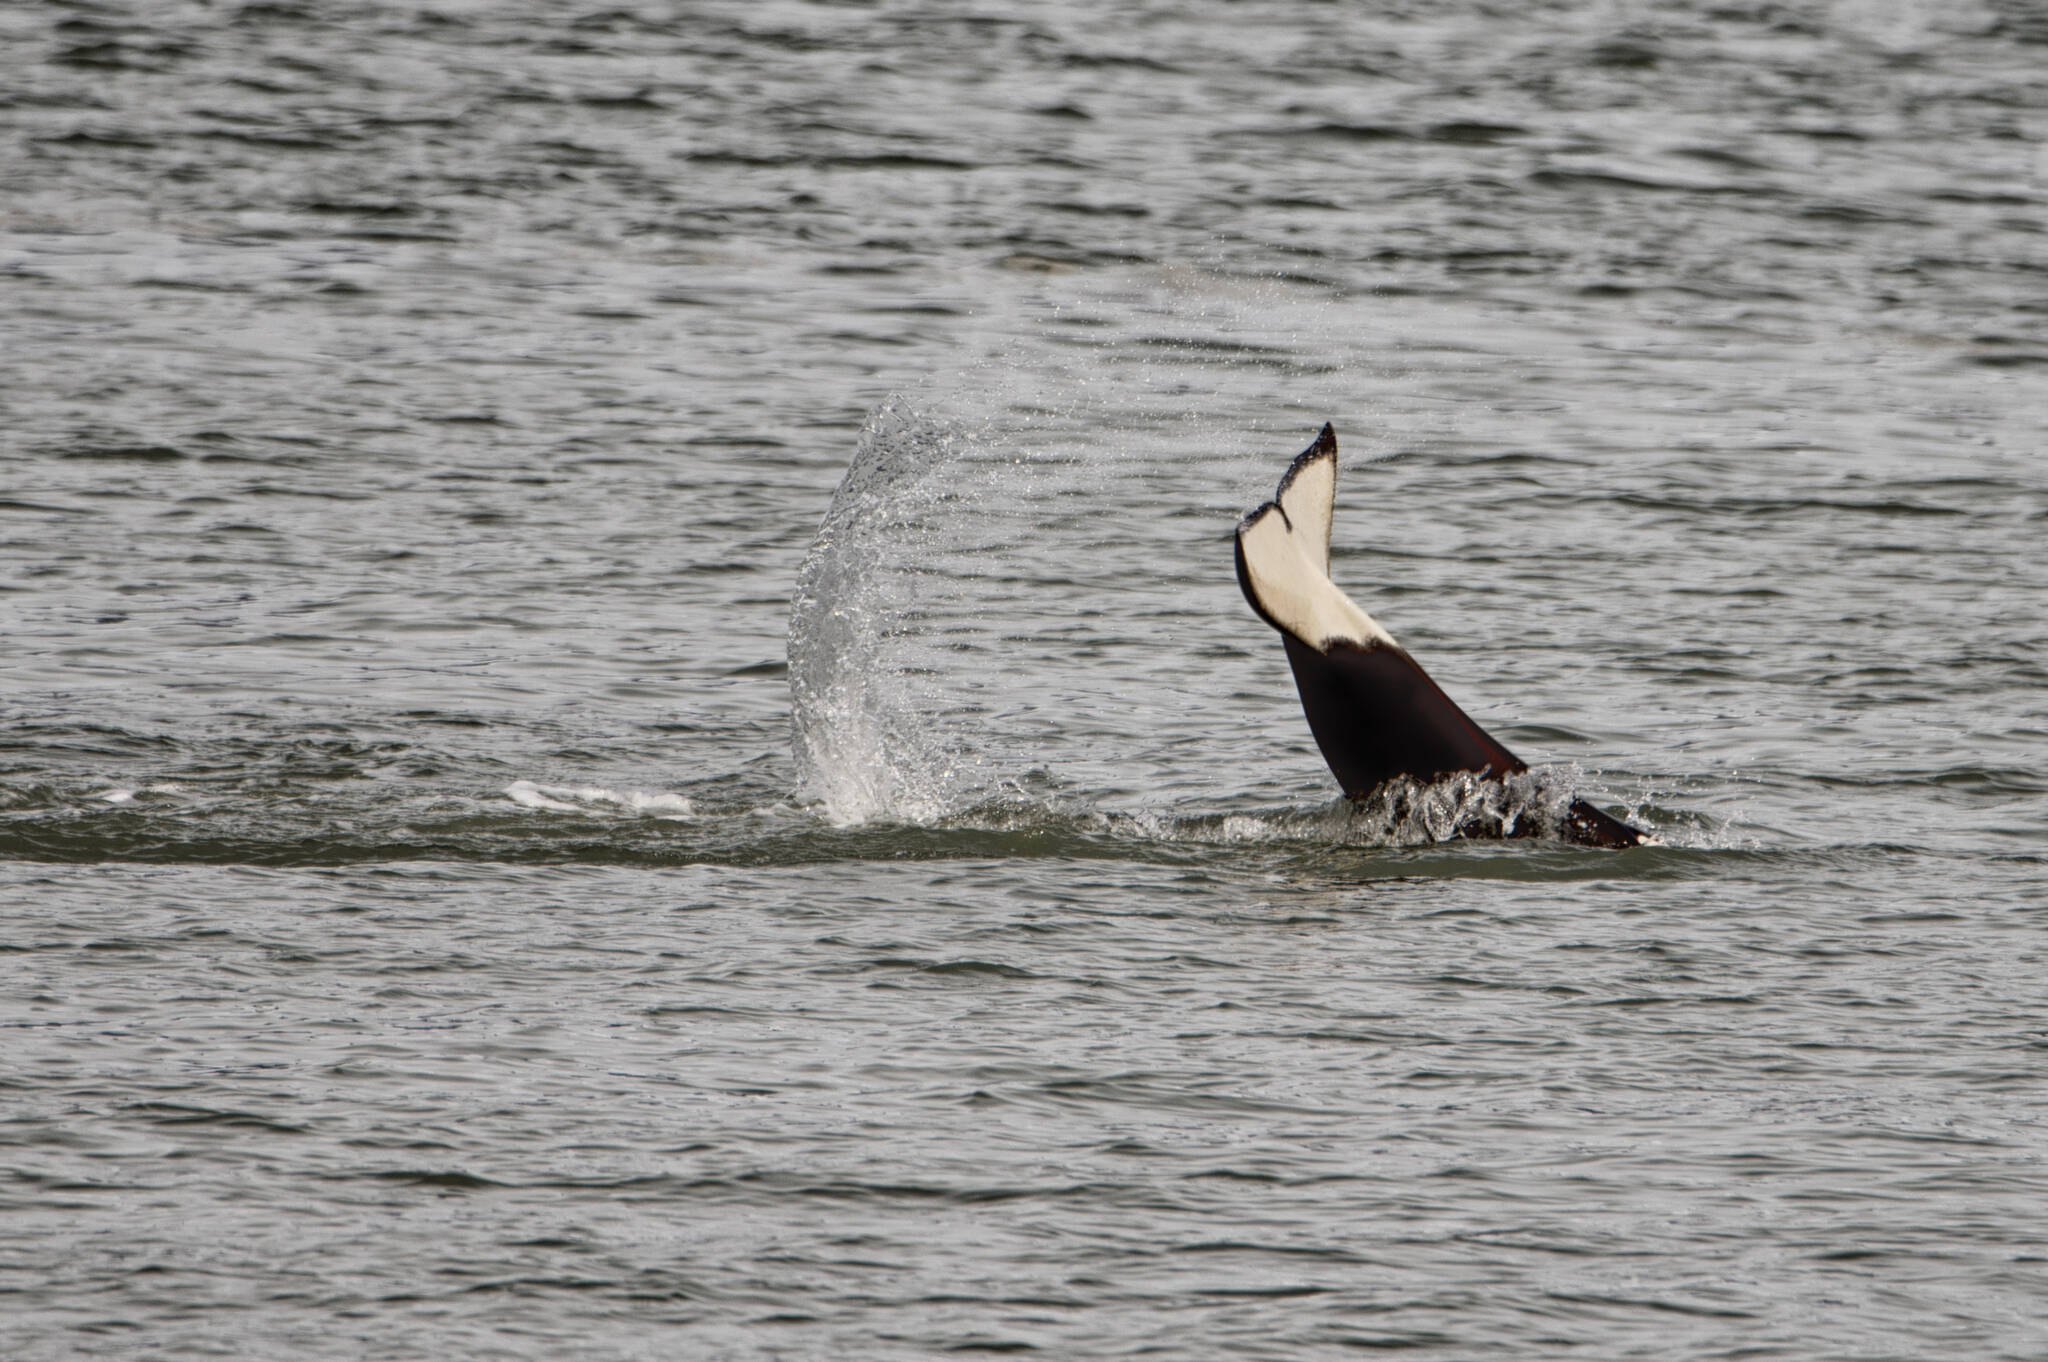 An orca splashes to disturb feed below in Fritz Cove. (Courtesy Photo / Kenneth Gill, gillfoto)